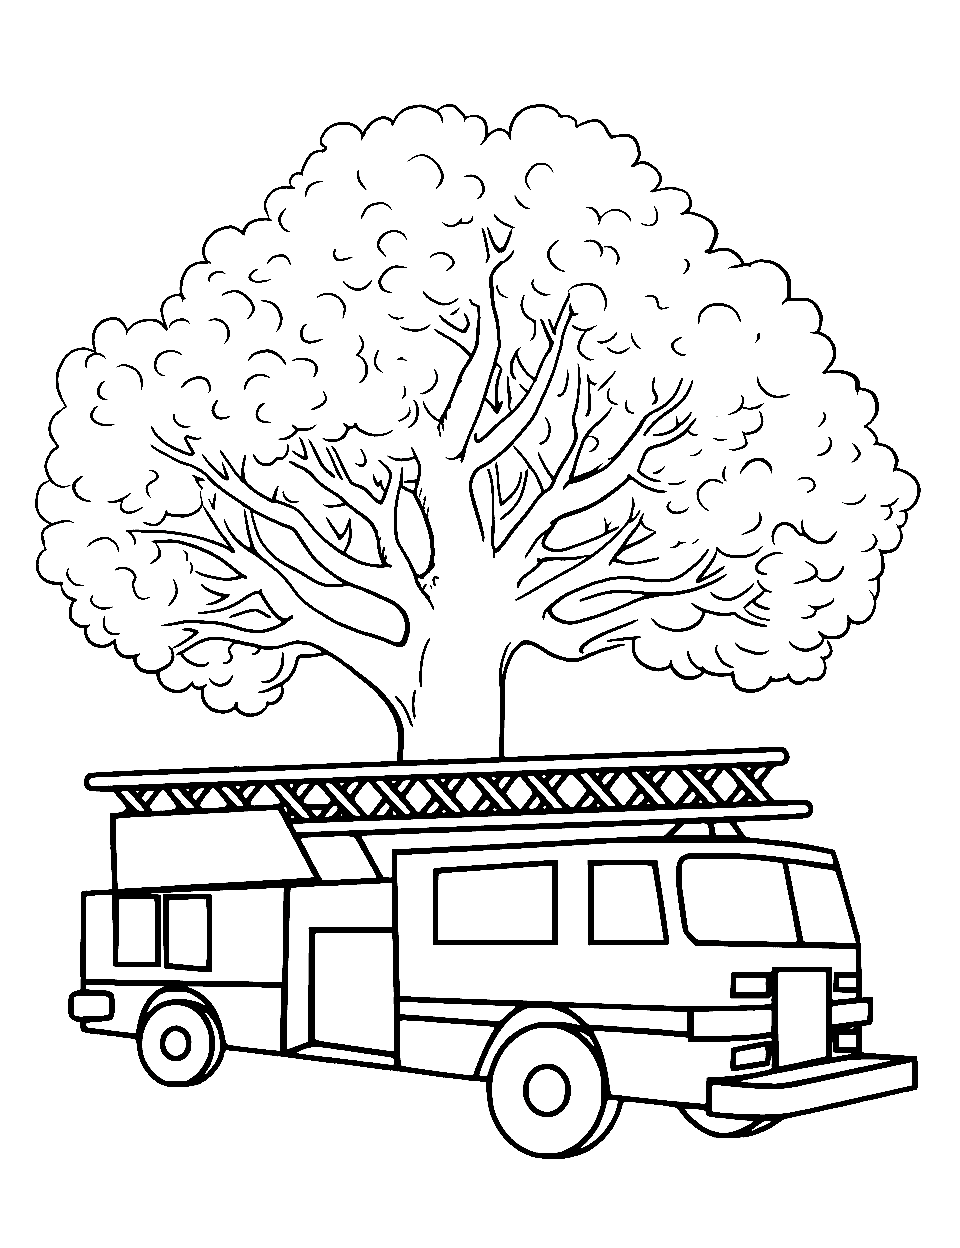 Fire Truck and Big Tree Coloring Page - A fire truck parked under a large, shady tree.